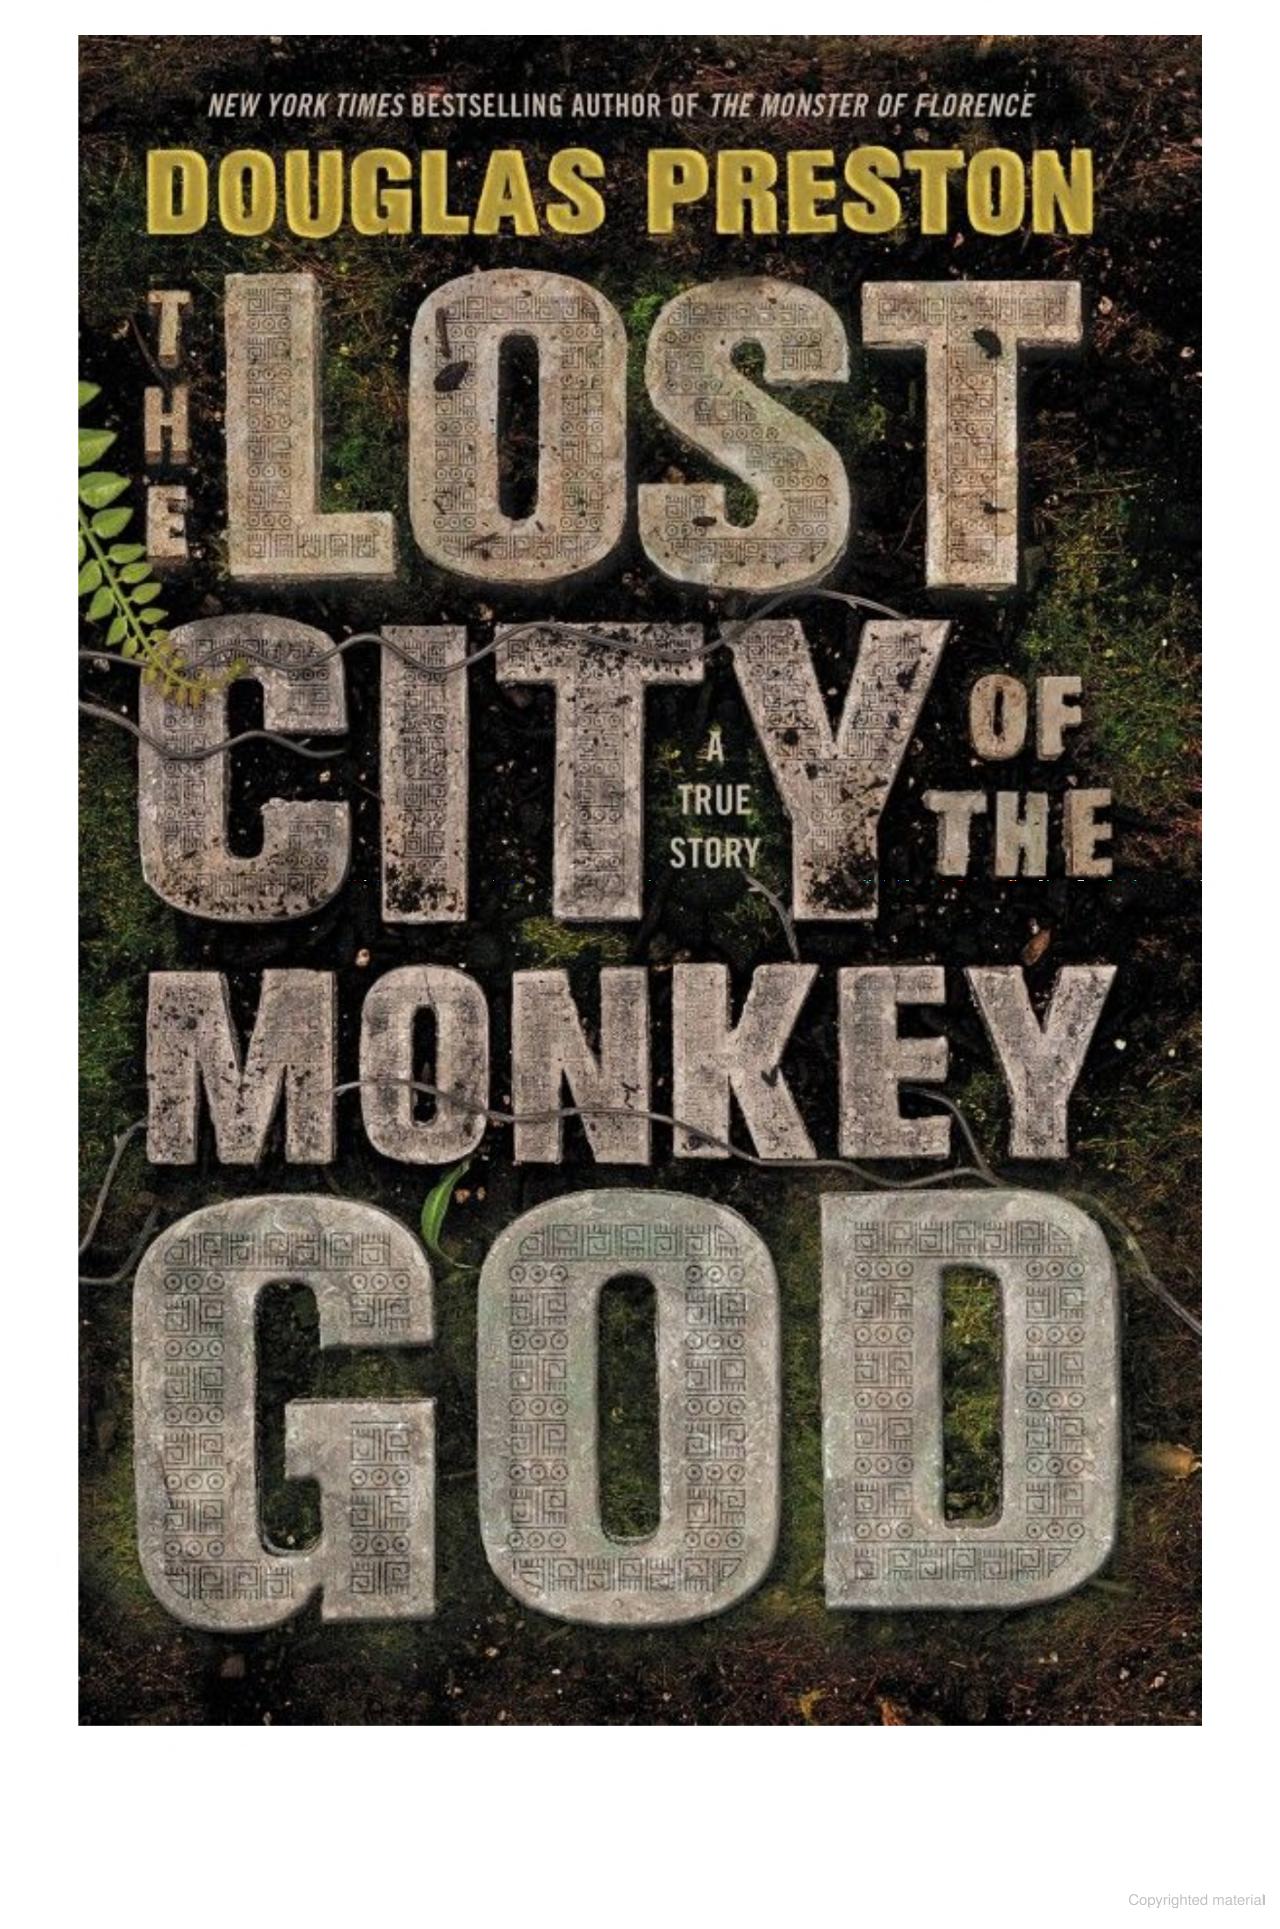 The Lost City of the Monkey God printed like it was carved in stone